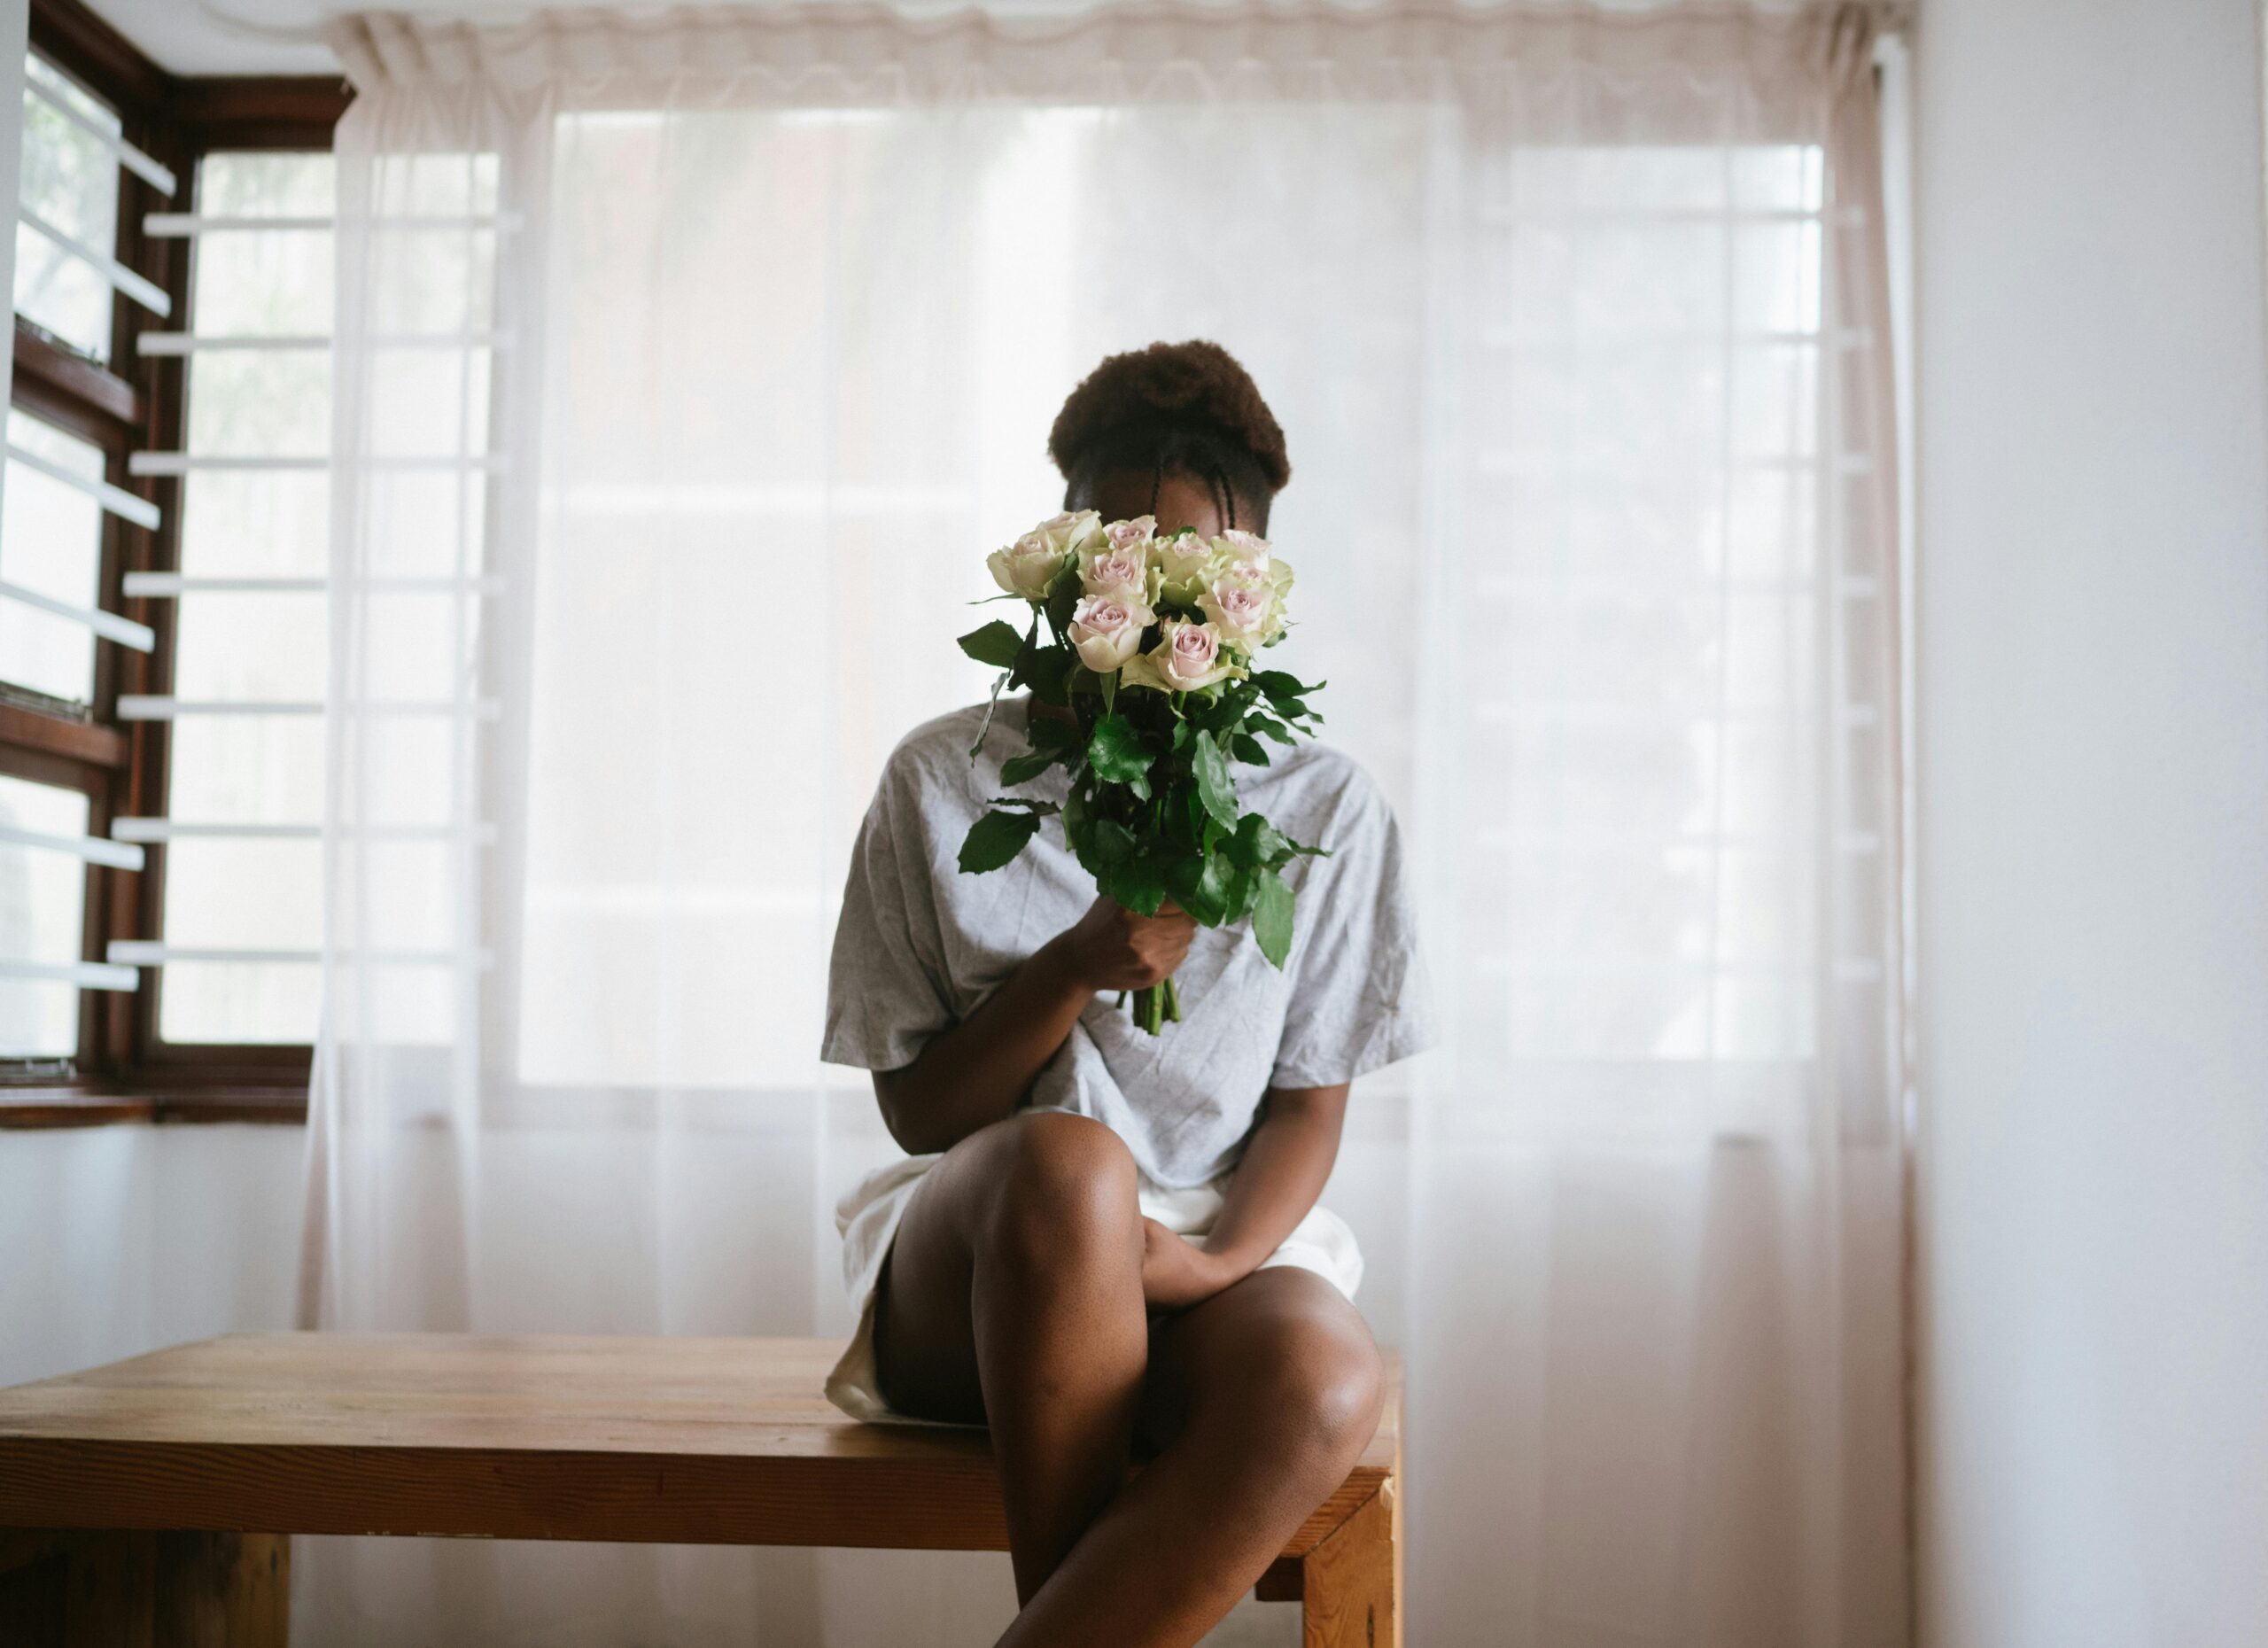 A person sitting serenely on a wooden stool, holding a bouquet of fresh, blooming flowers close to their face, symbolizing a moment of self-care and the practice of intentional love.